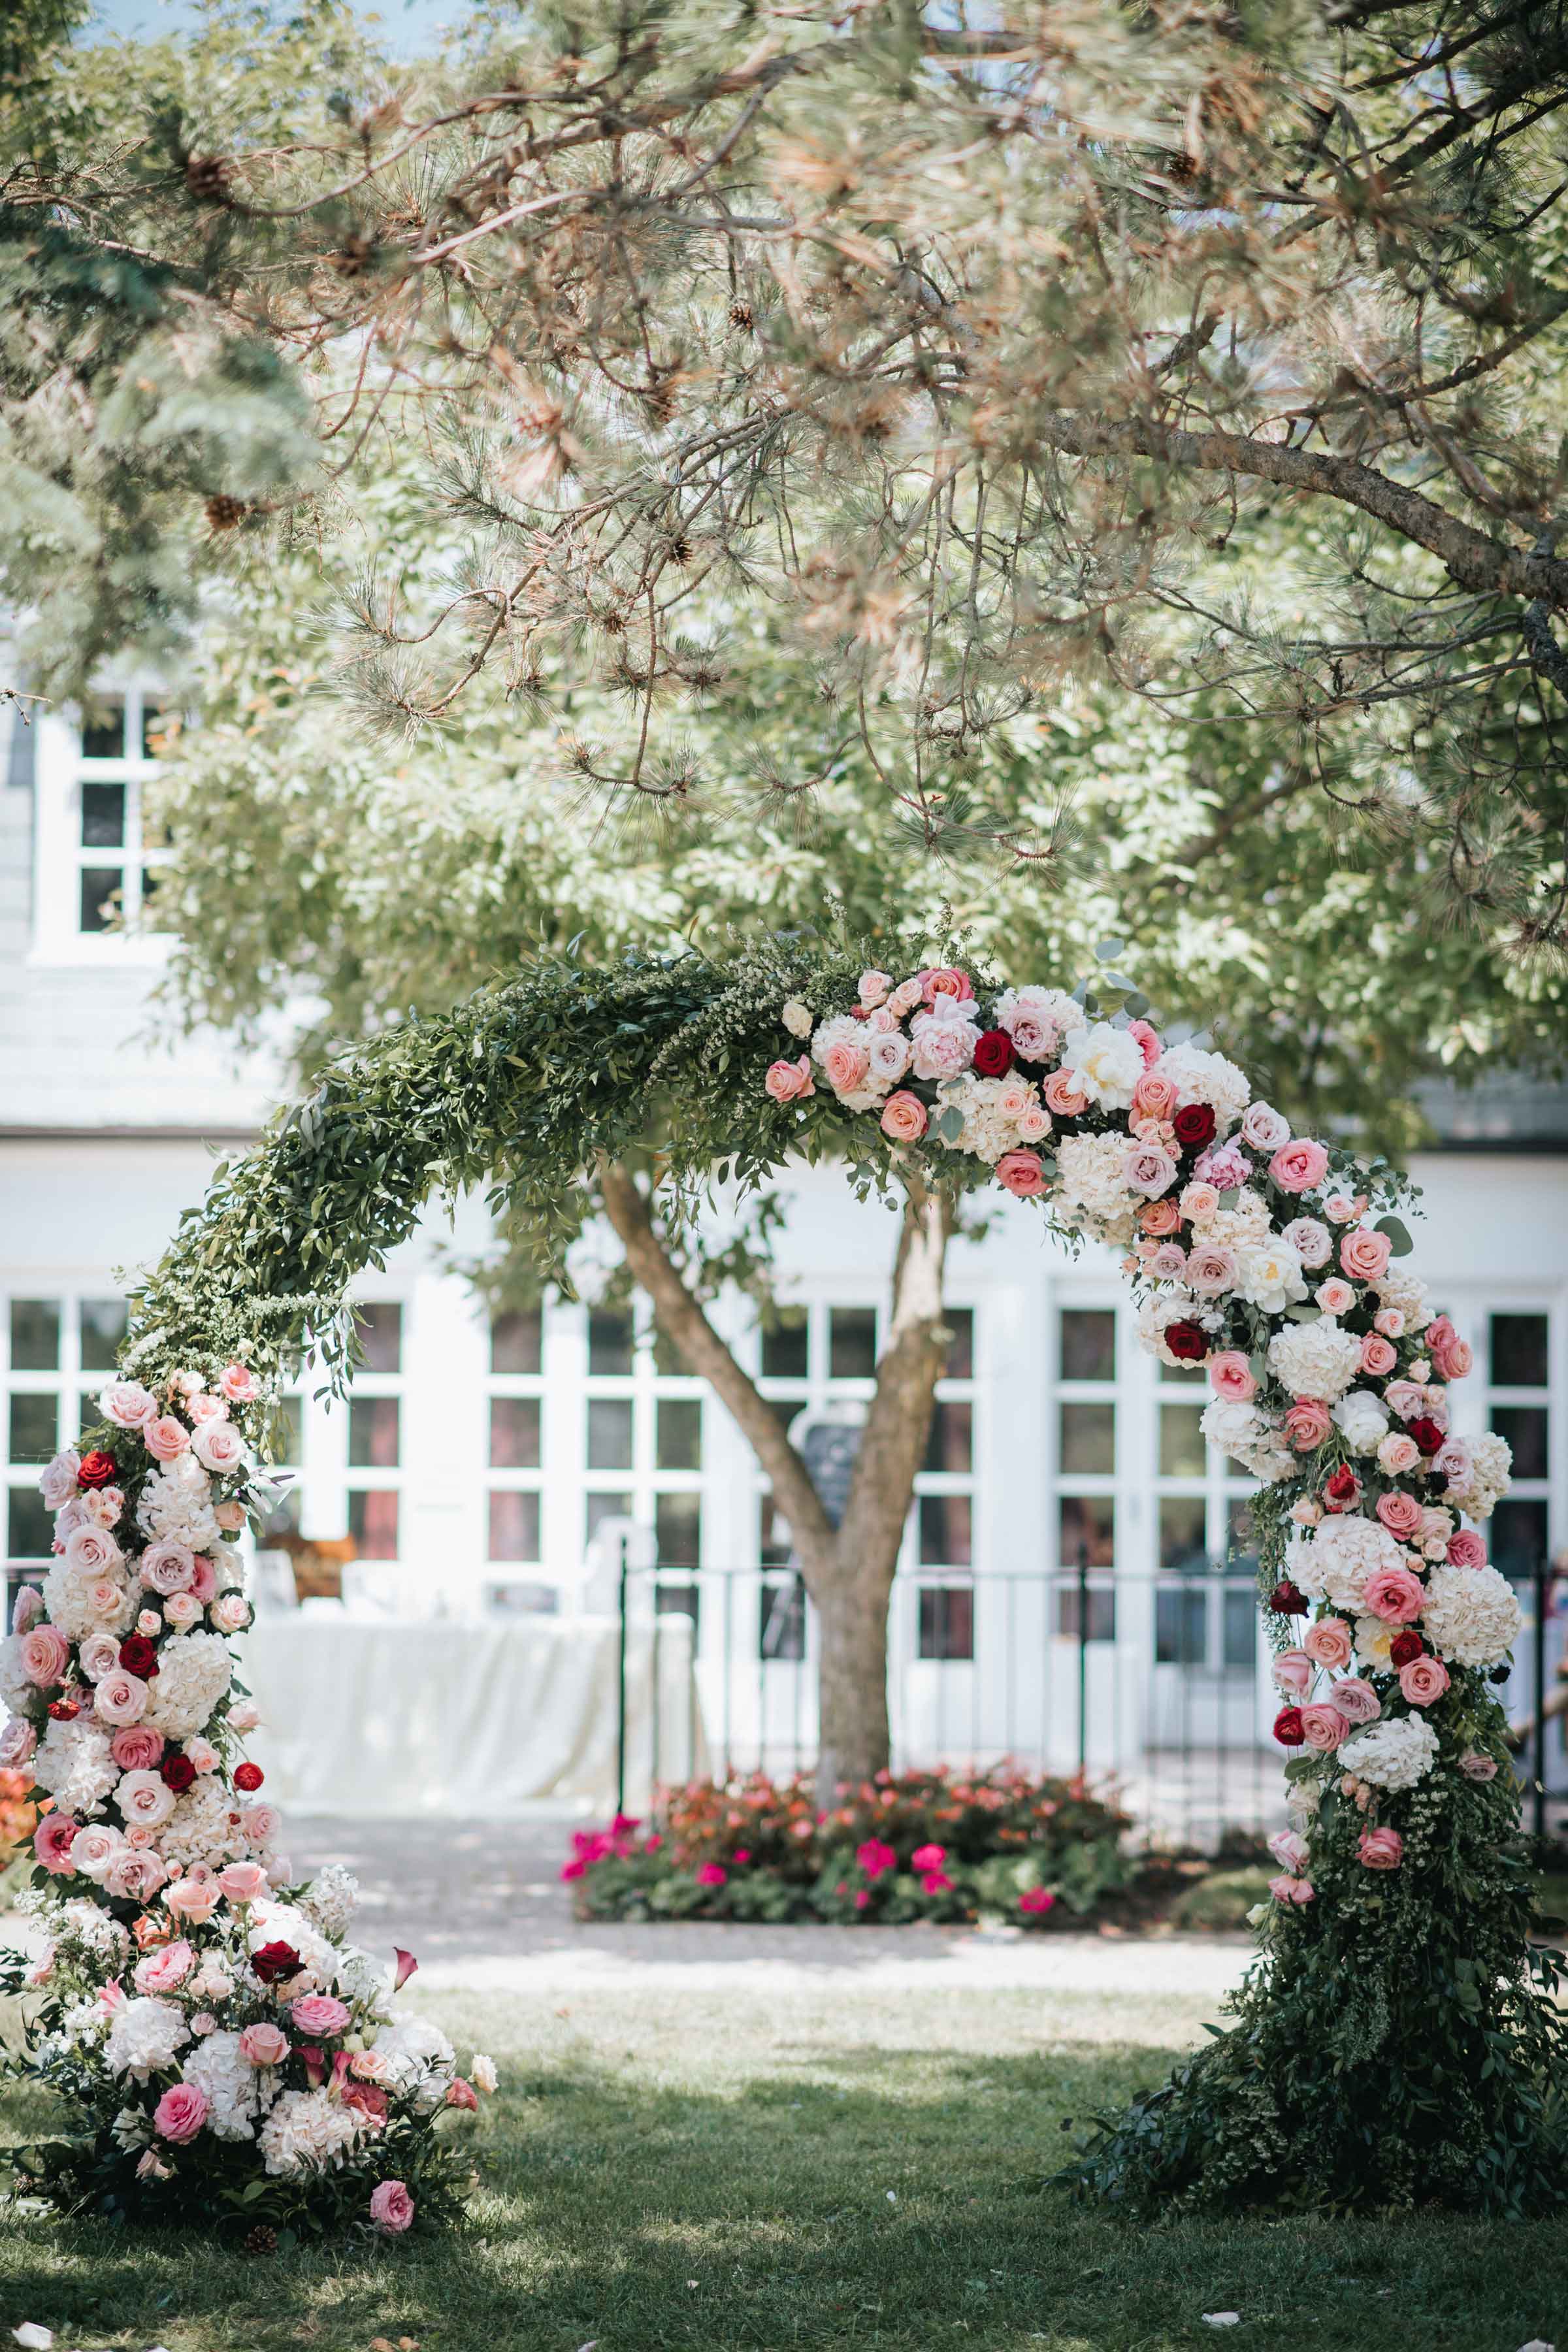 Outdoor floral setting